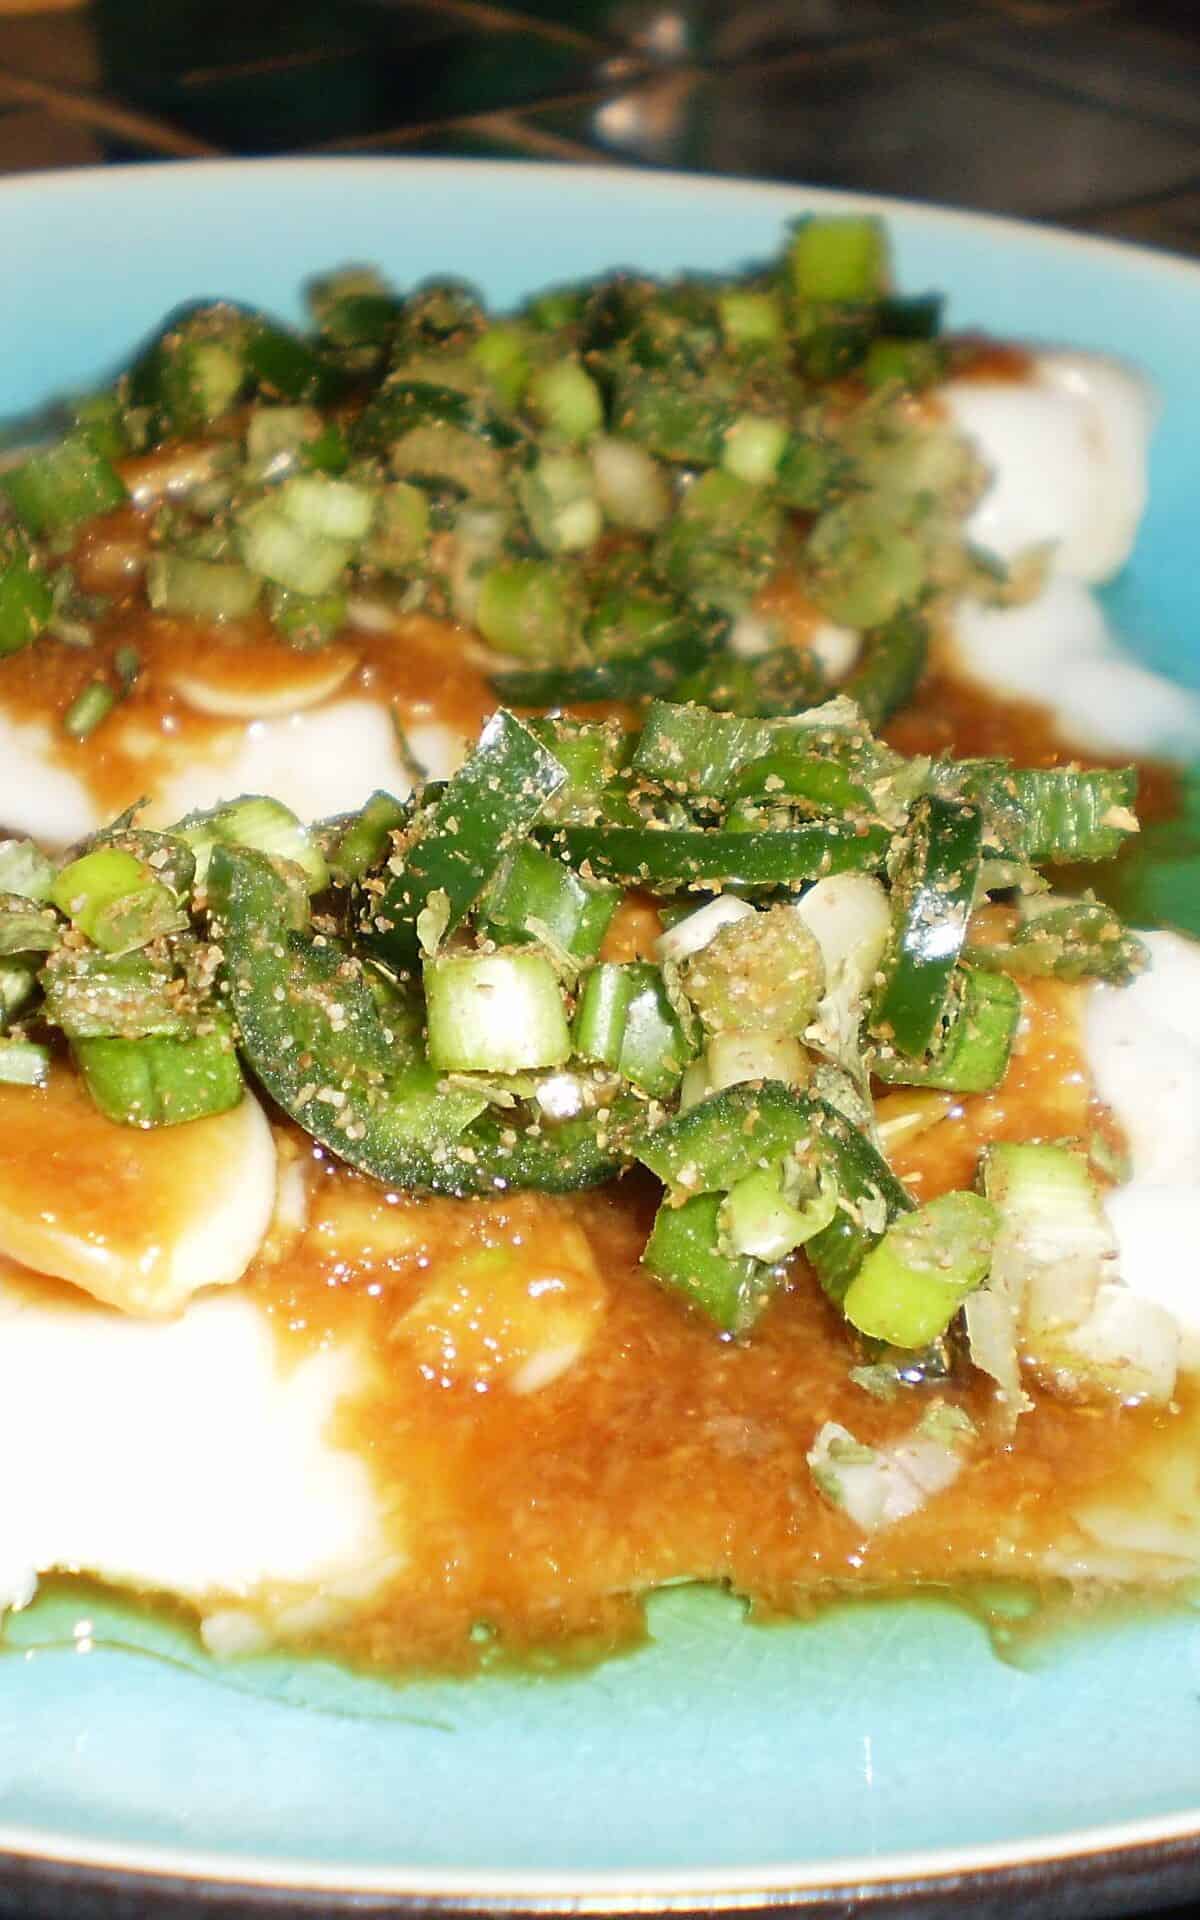  Simple and delicious steamed fish recipe.